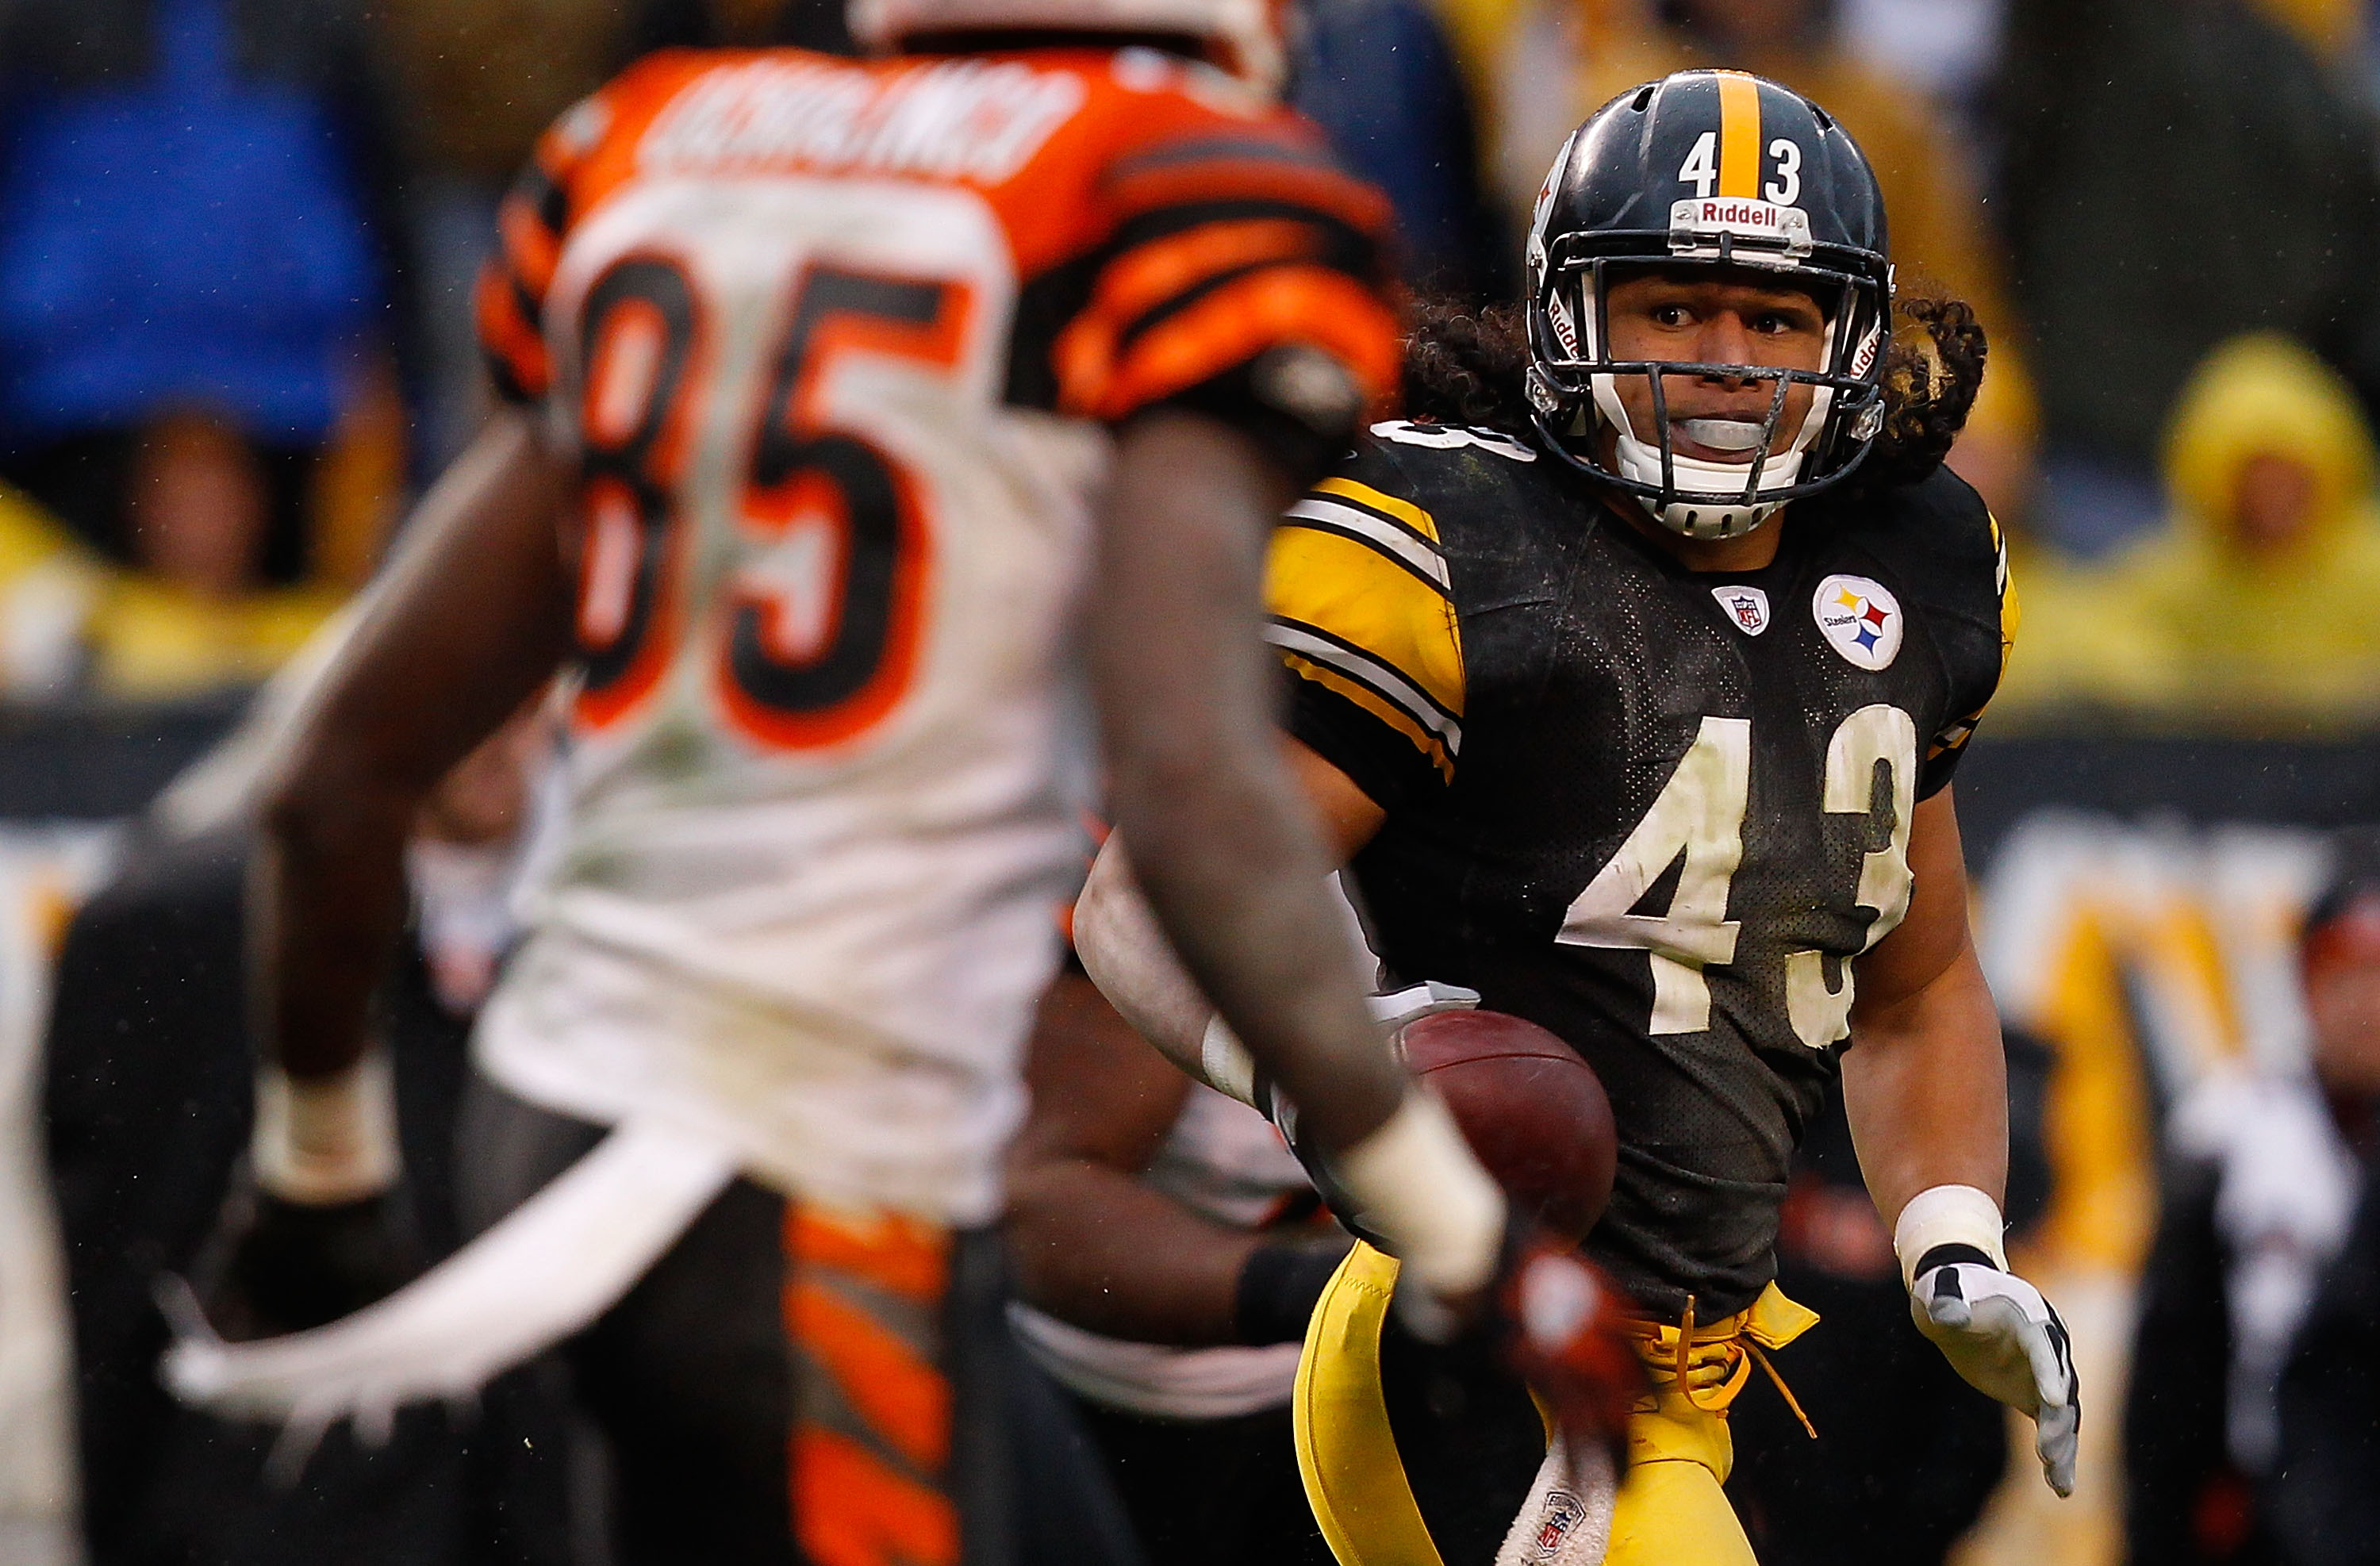 PITTSBURGH - DECEMBER 12:  Troy Polamalu #43 of the Pittsburgh Steelers intercepts a pass from Carson Palmer #9 of the Cincinnati Bengals during the game on December 12, 2010 at Heinz Field in Pittsburgh, Pennsylvania.  (Photo by Jared Wickerham/Getty Ima